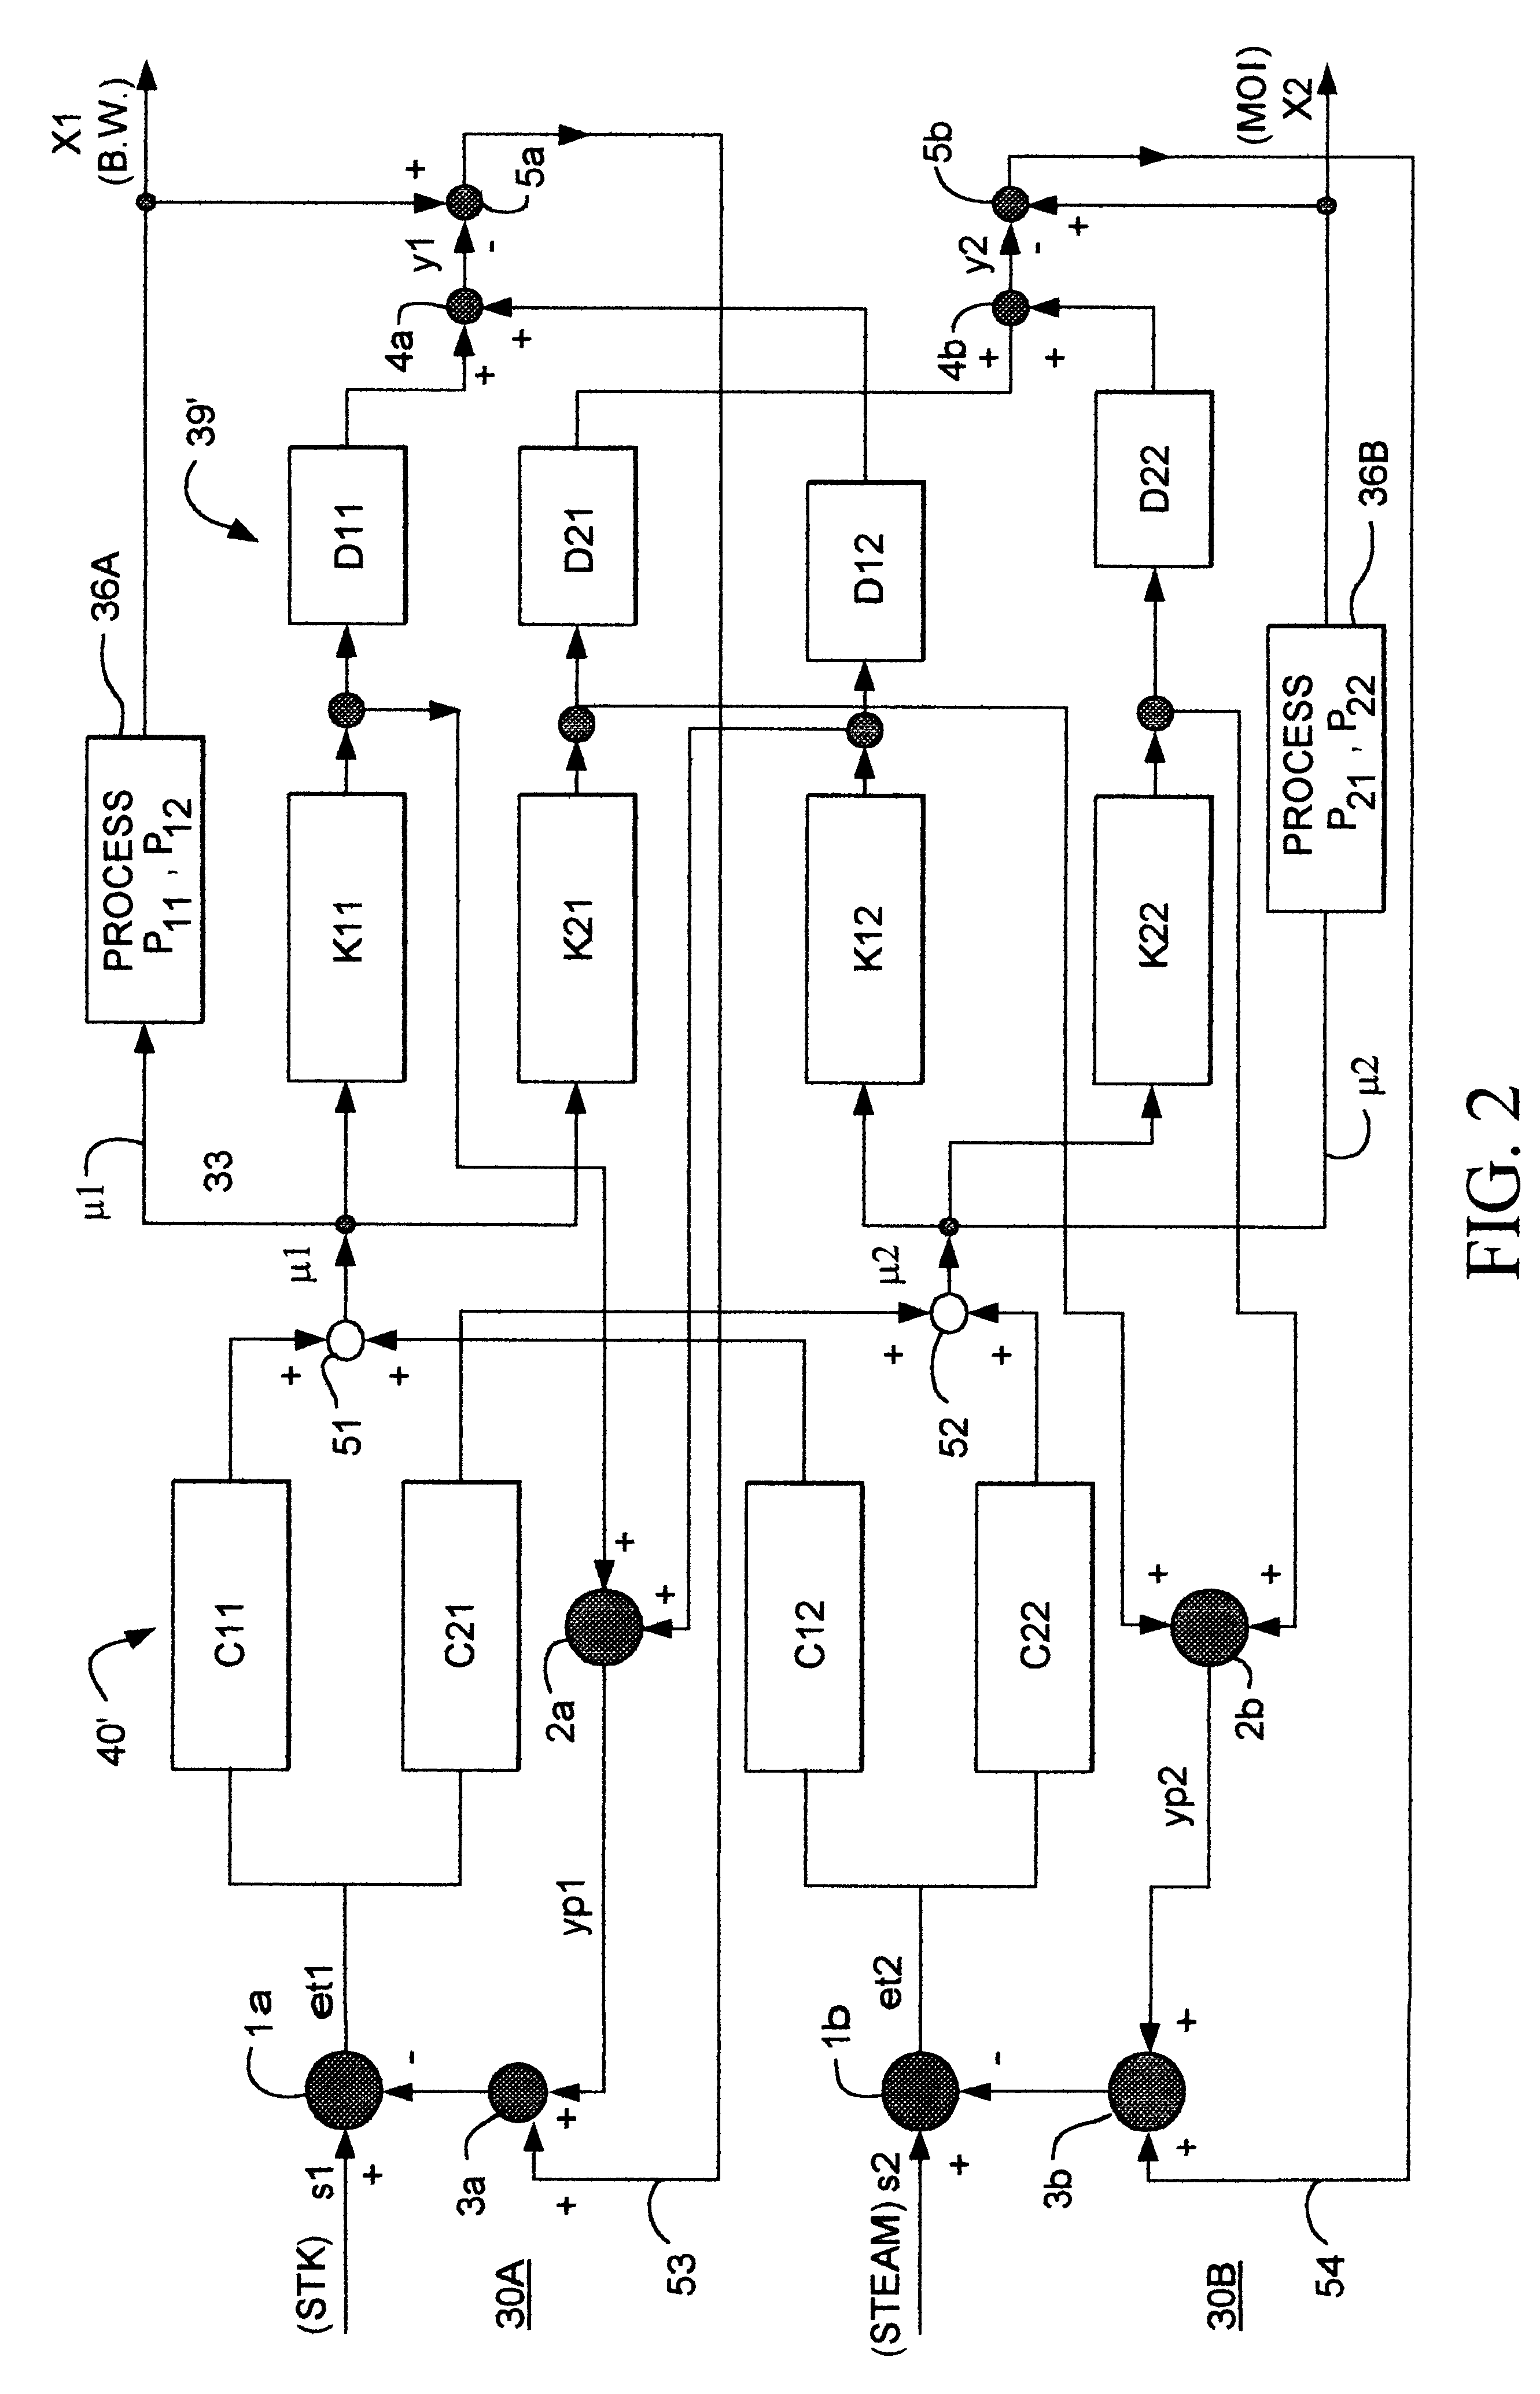 Decoupling controller for use with a process having two input variables and two output variables